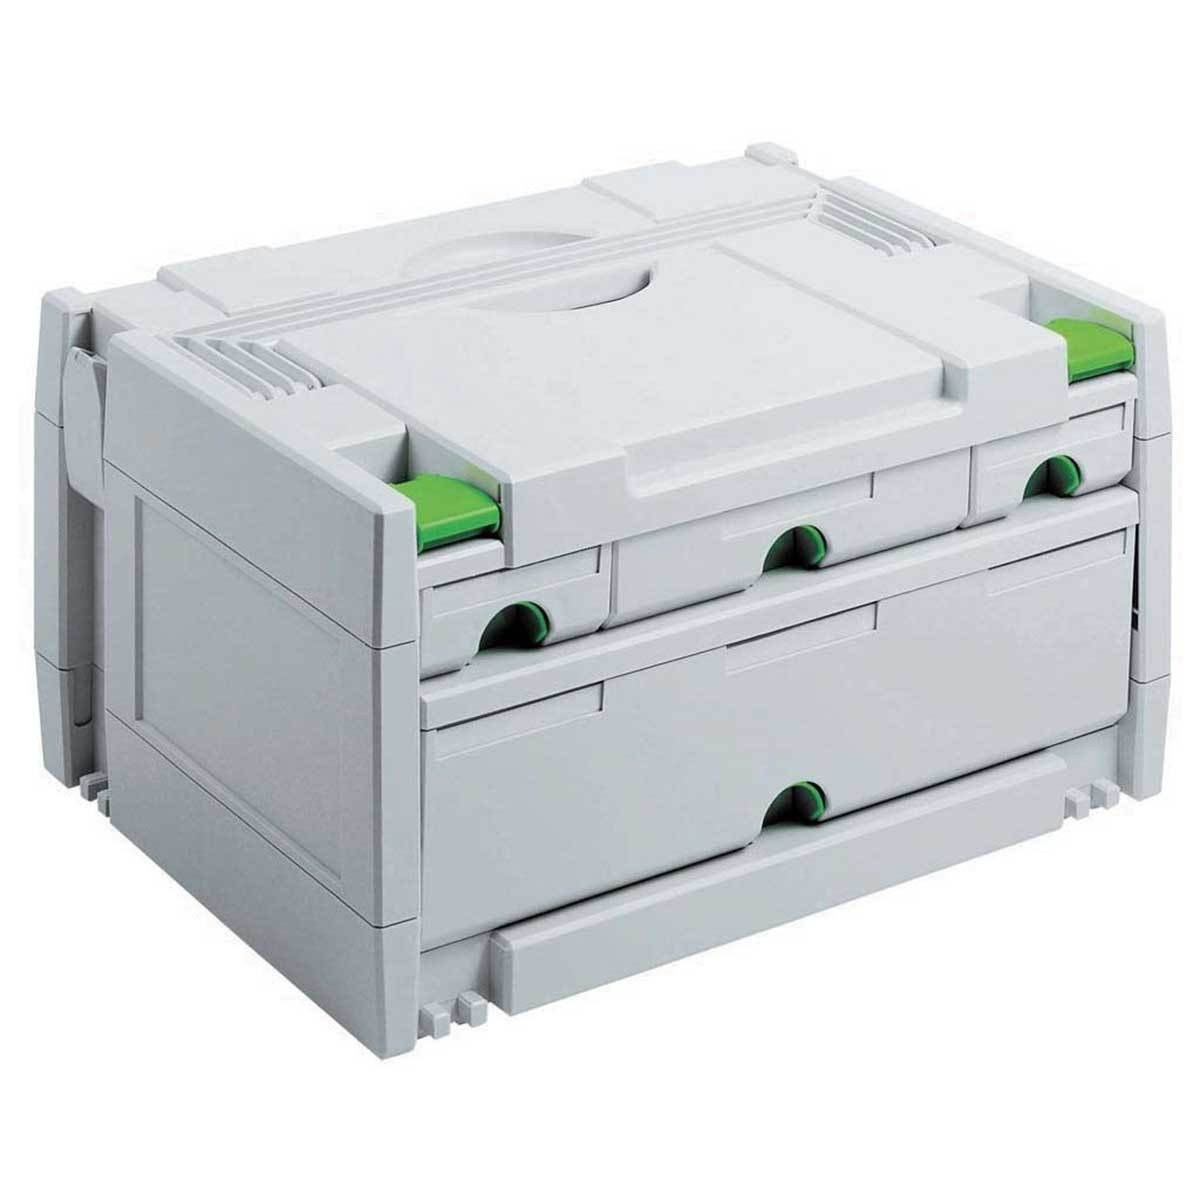 Ultimate Tools Festool Sortainers (Systainers with Drawers)